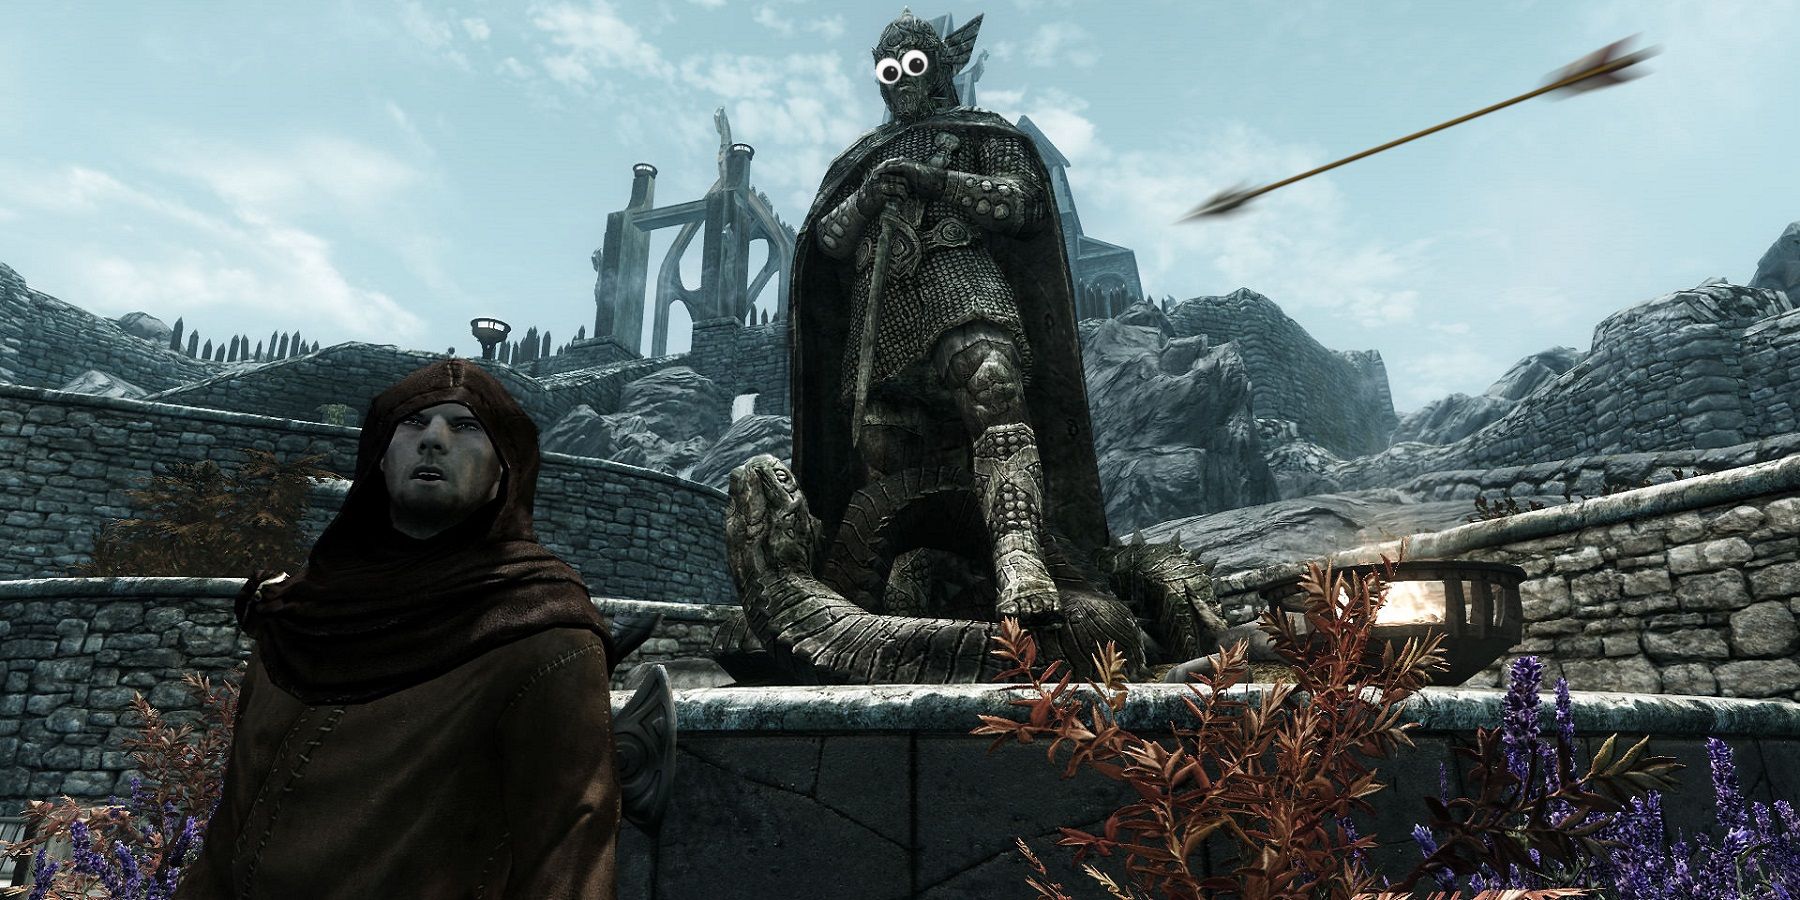 Image from Skyrim showing Heimskr stood in front of the statue of Talos, and is about to be shot by an arrow.